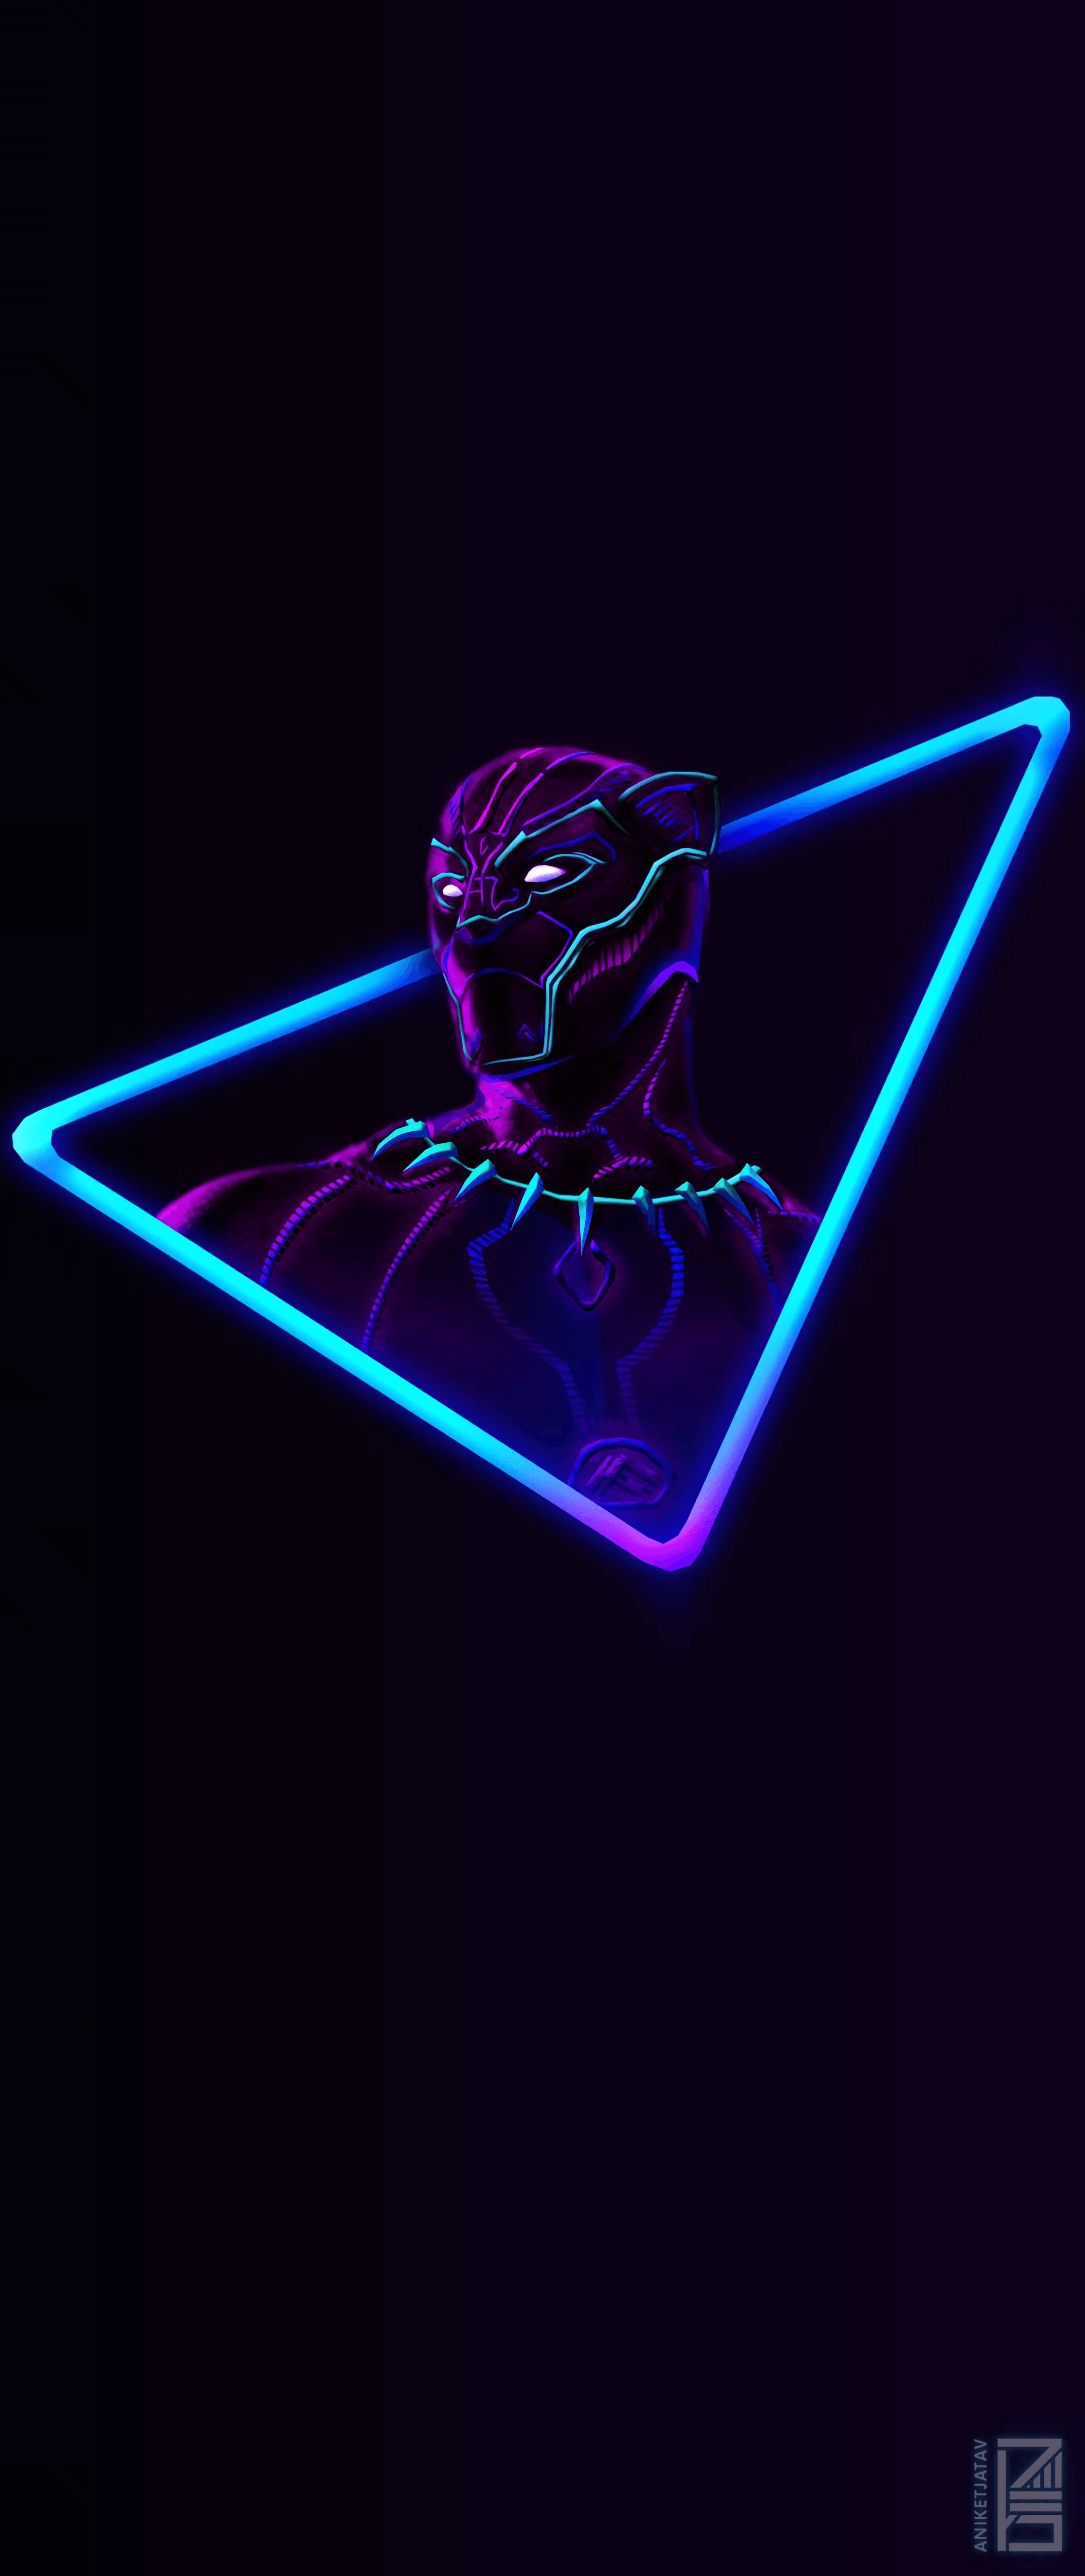 I Upscaled the Neon Black Panther artwork for phone wallpaper 18:9